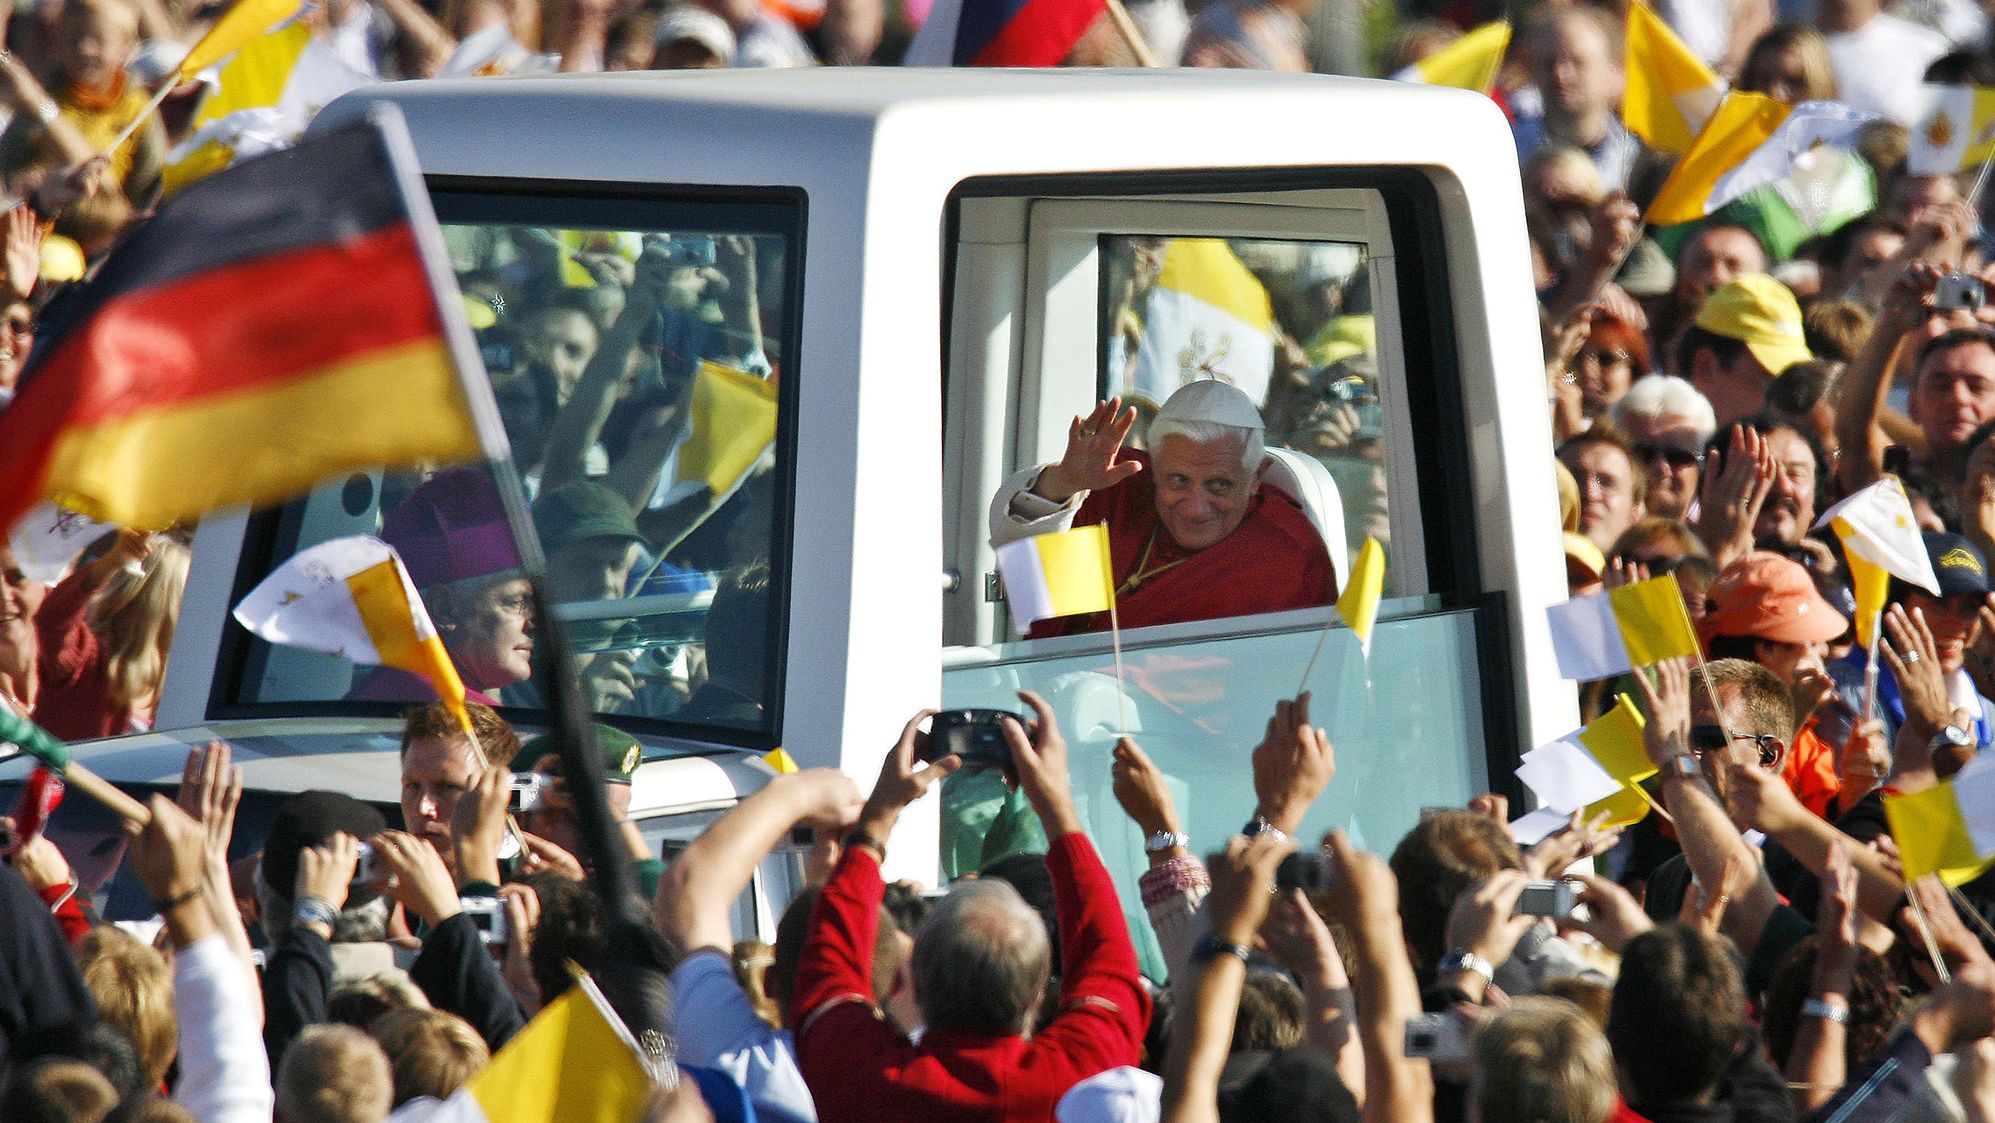 The Pope waves to people from his "popemobile" as he arrives for a Mass in Regensburg, Germany, in September 2006. He was on a six-day visit to his native country.